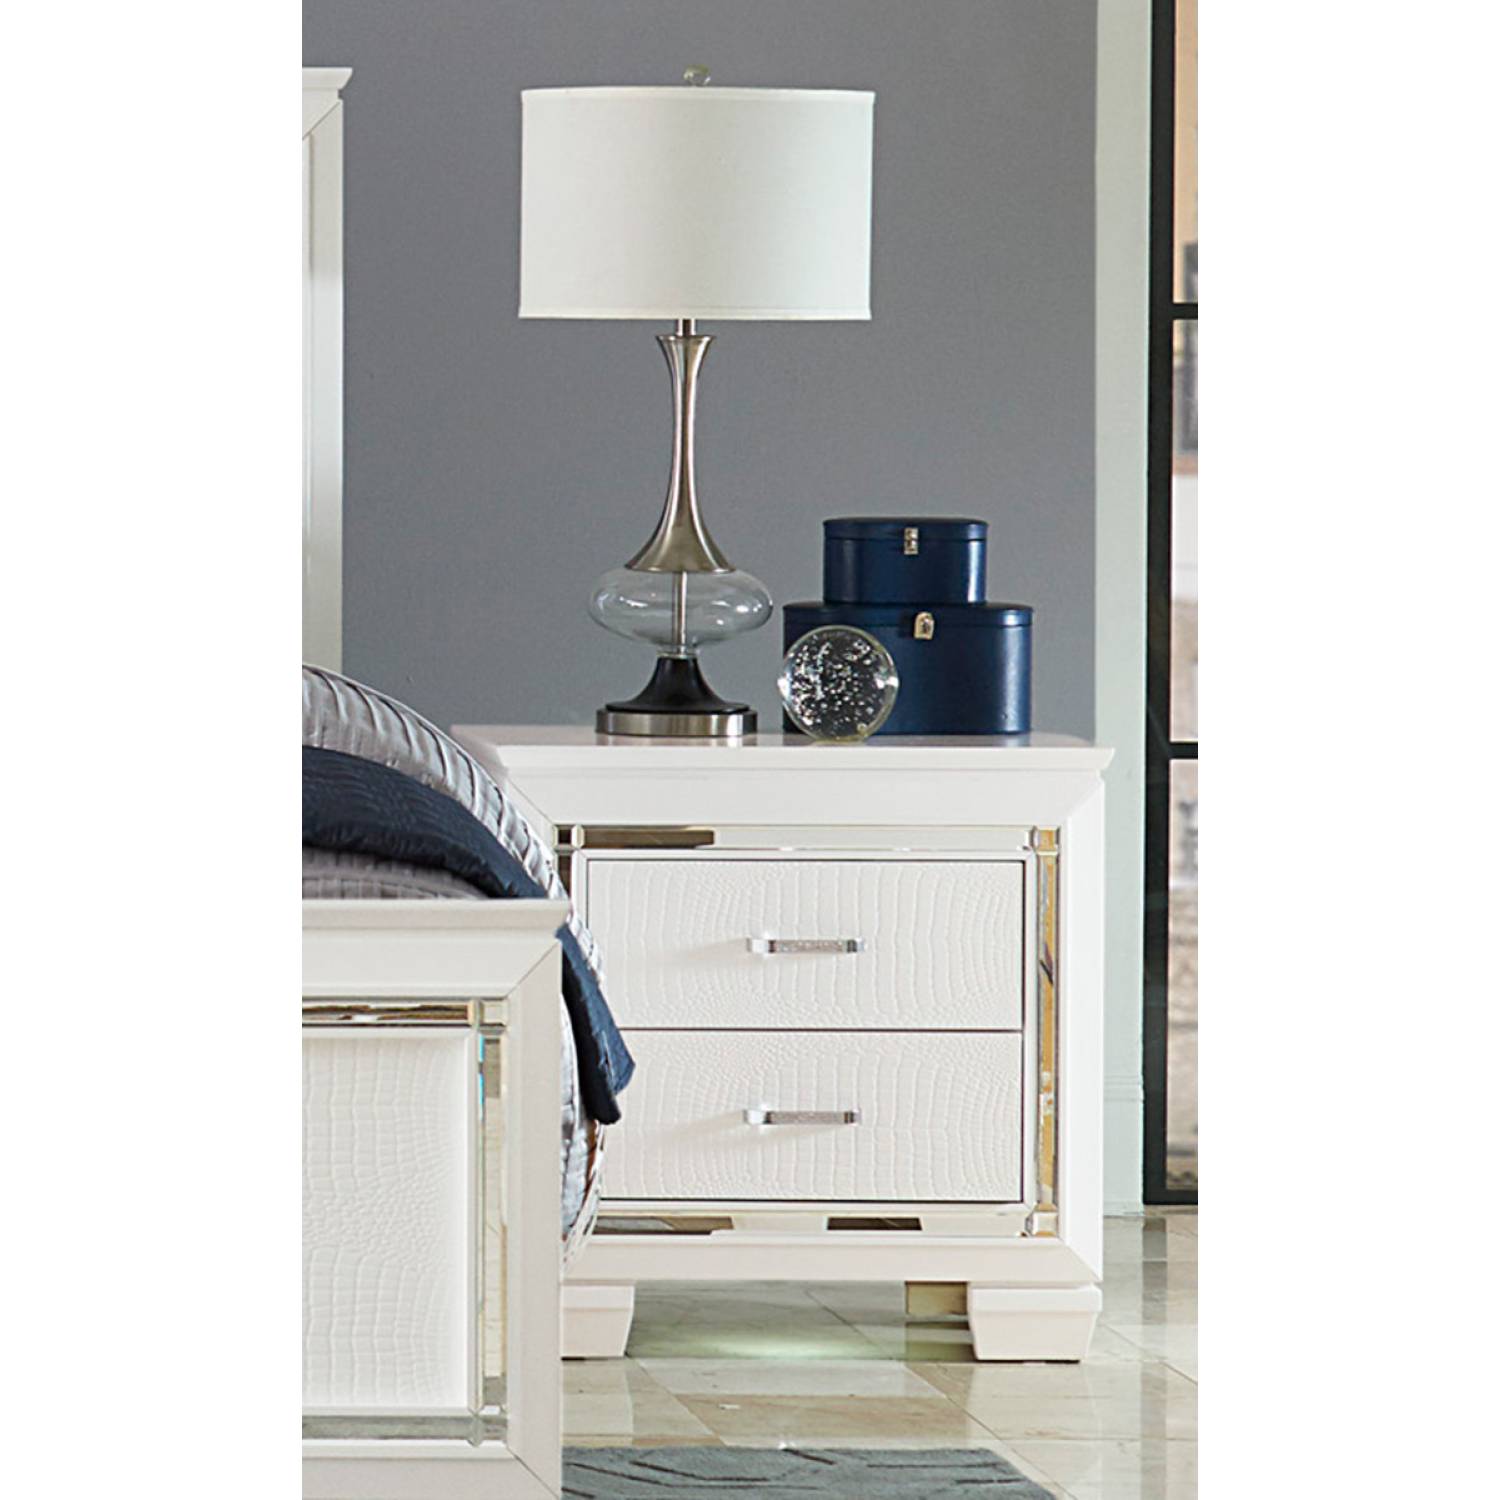 1916W-4 Allura Night Stand with LED Lighting - White